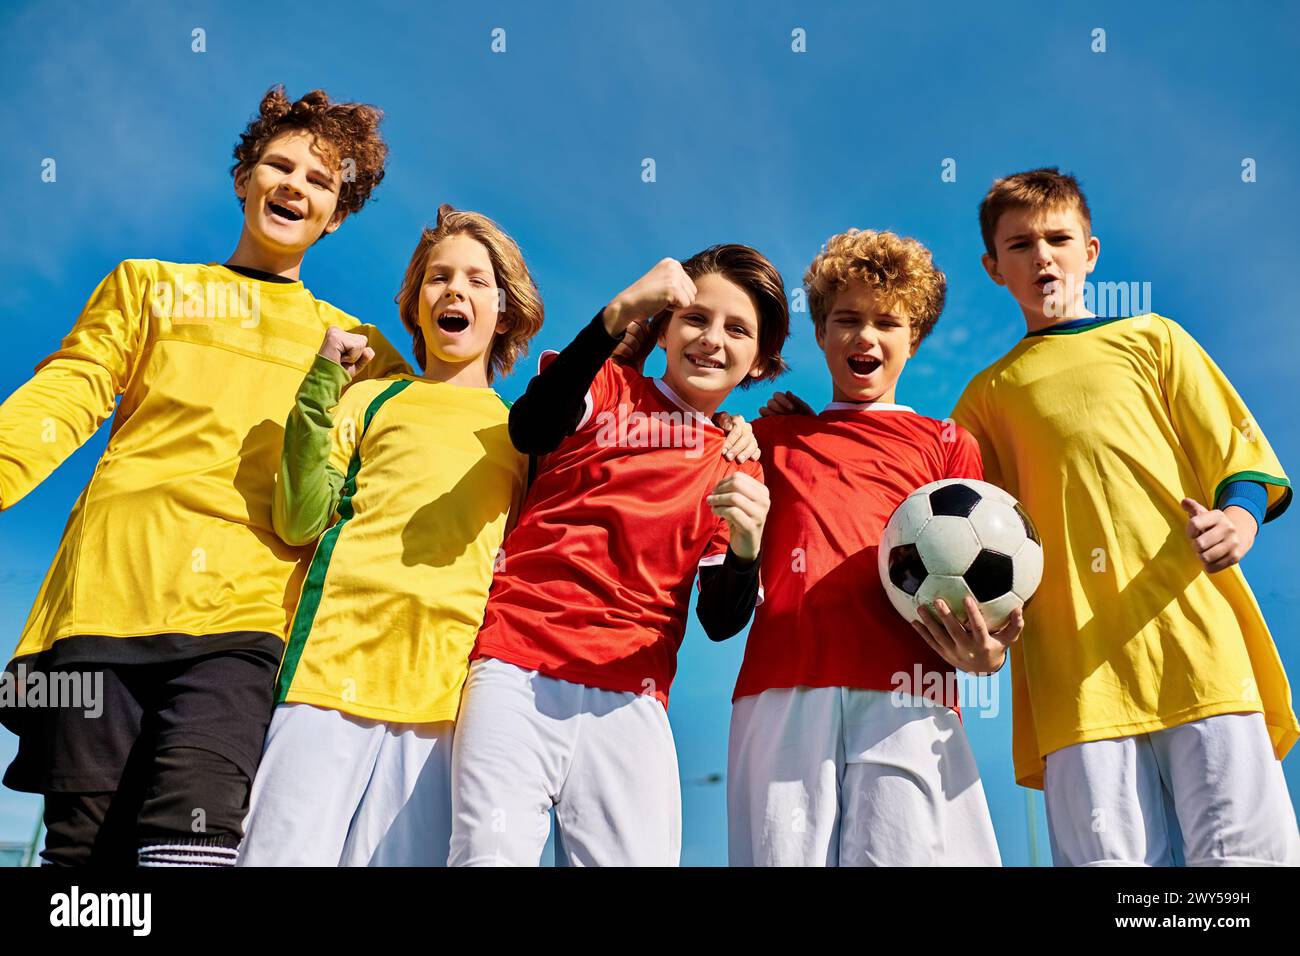 A lively group of young individuals stand closely together, holding a soccer ball with enthusiasm and camaraderie. Their faces reflect excitement and Stock Photo